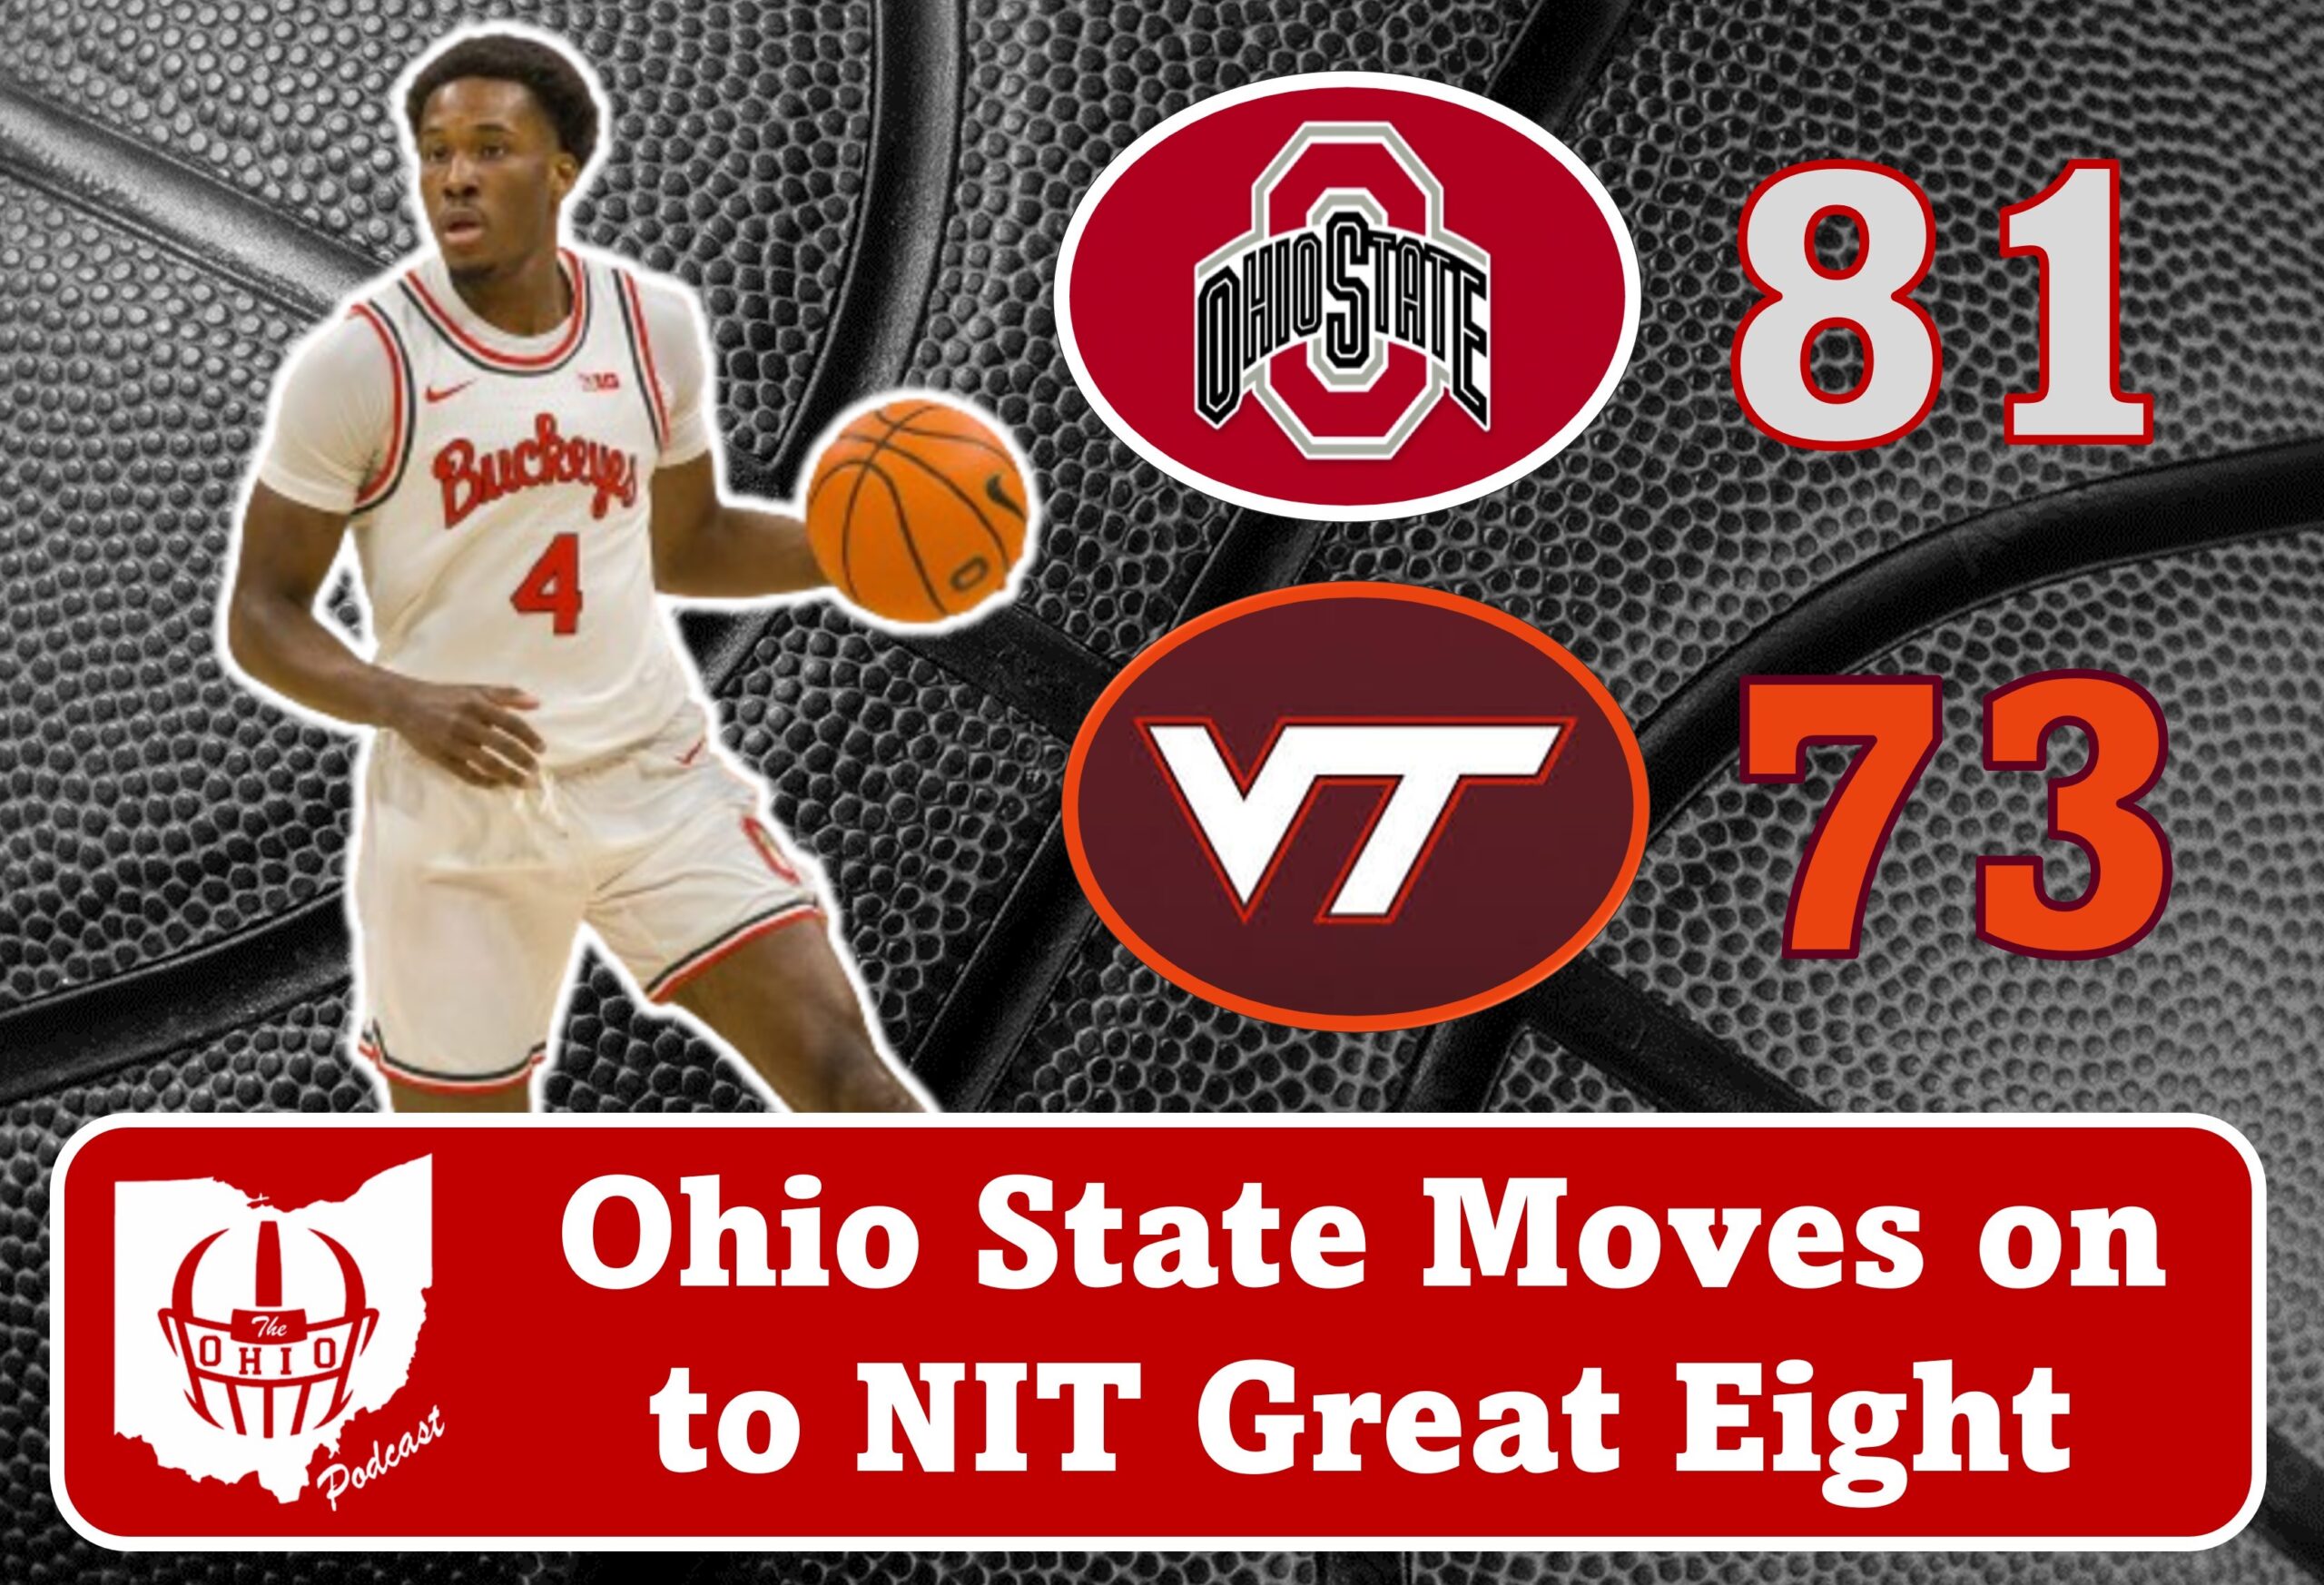 Ohio State Move on to NIT Great Eight